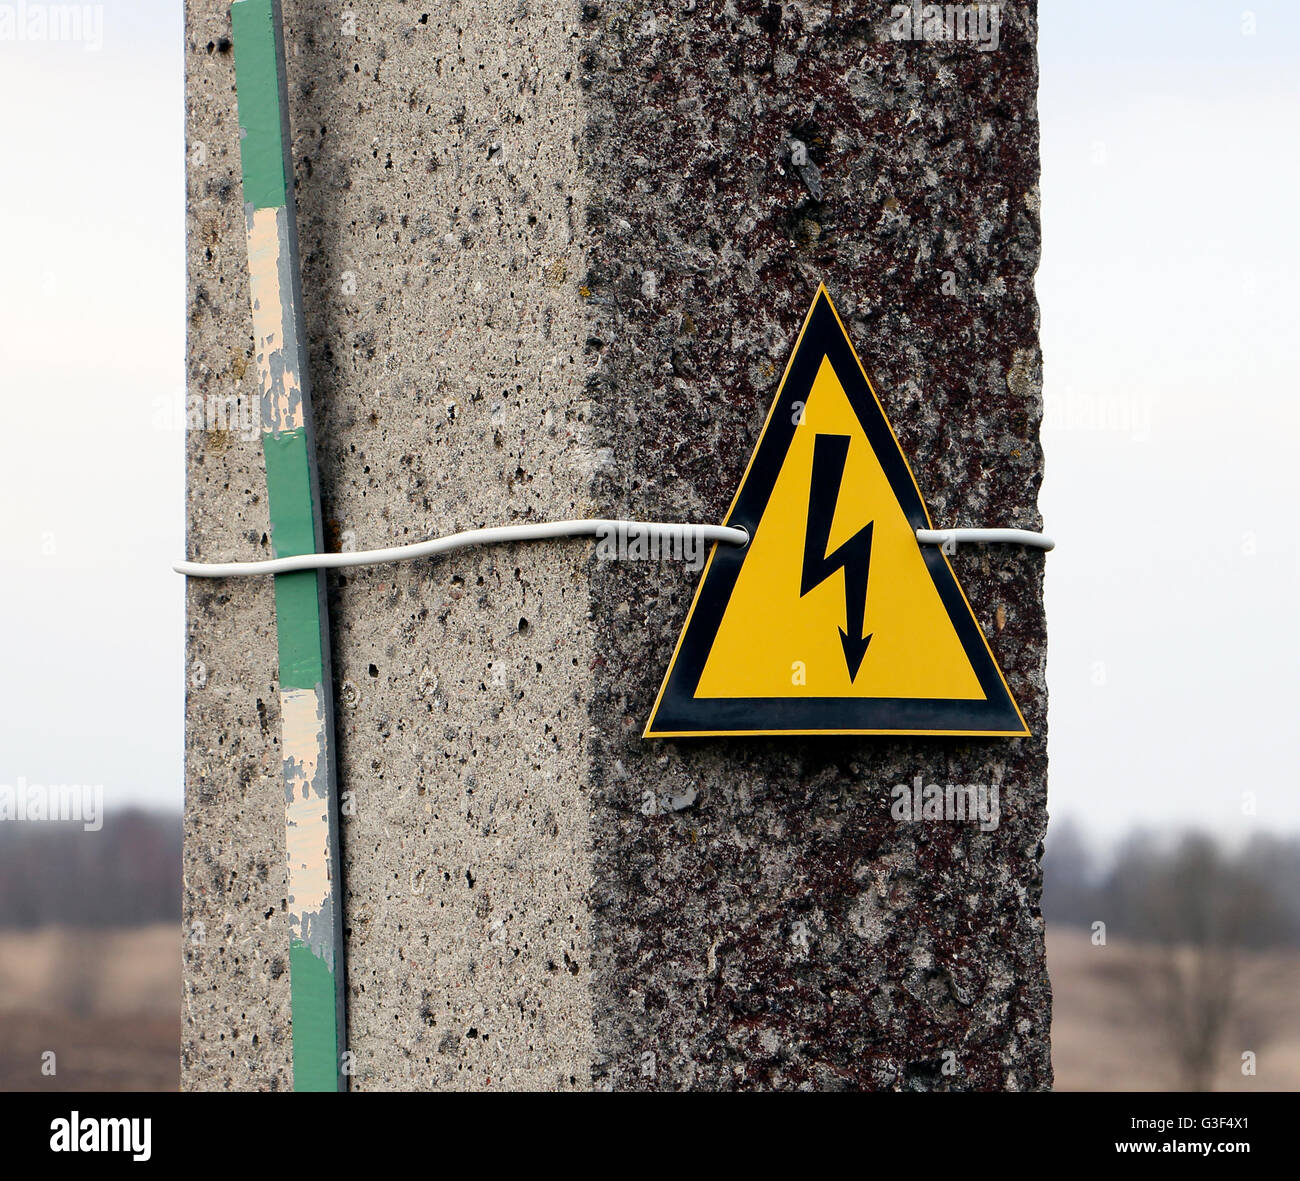 Reinforced concrete electricity pole with sign warning caution electricity shock risk high voltage keep out Stock Photo